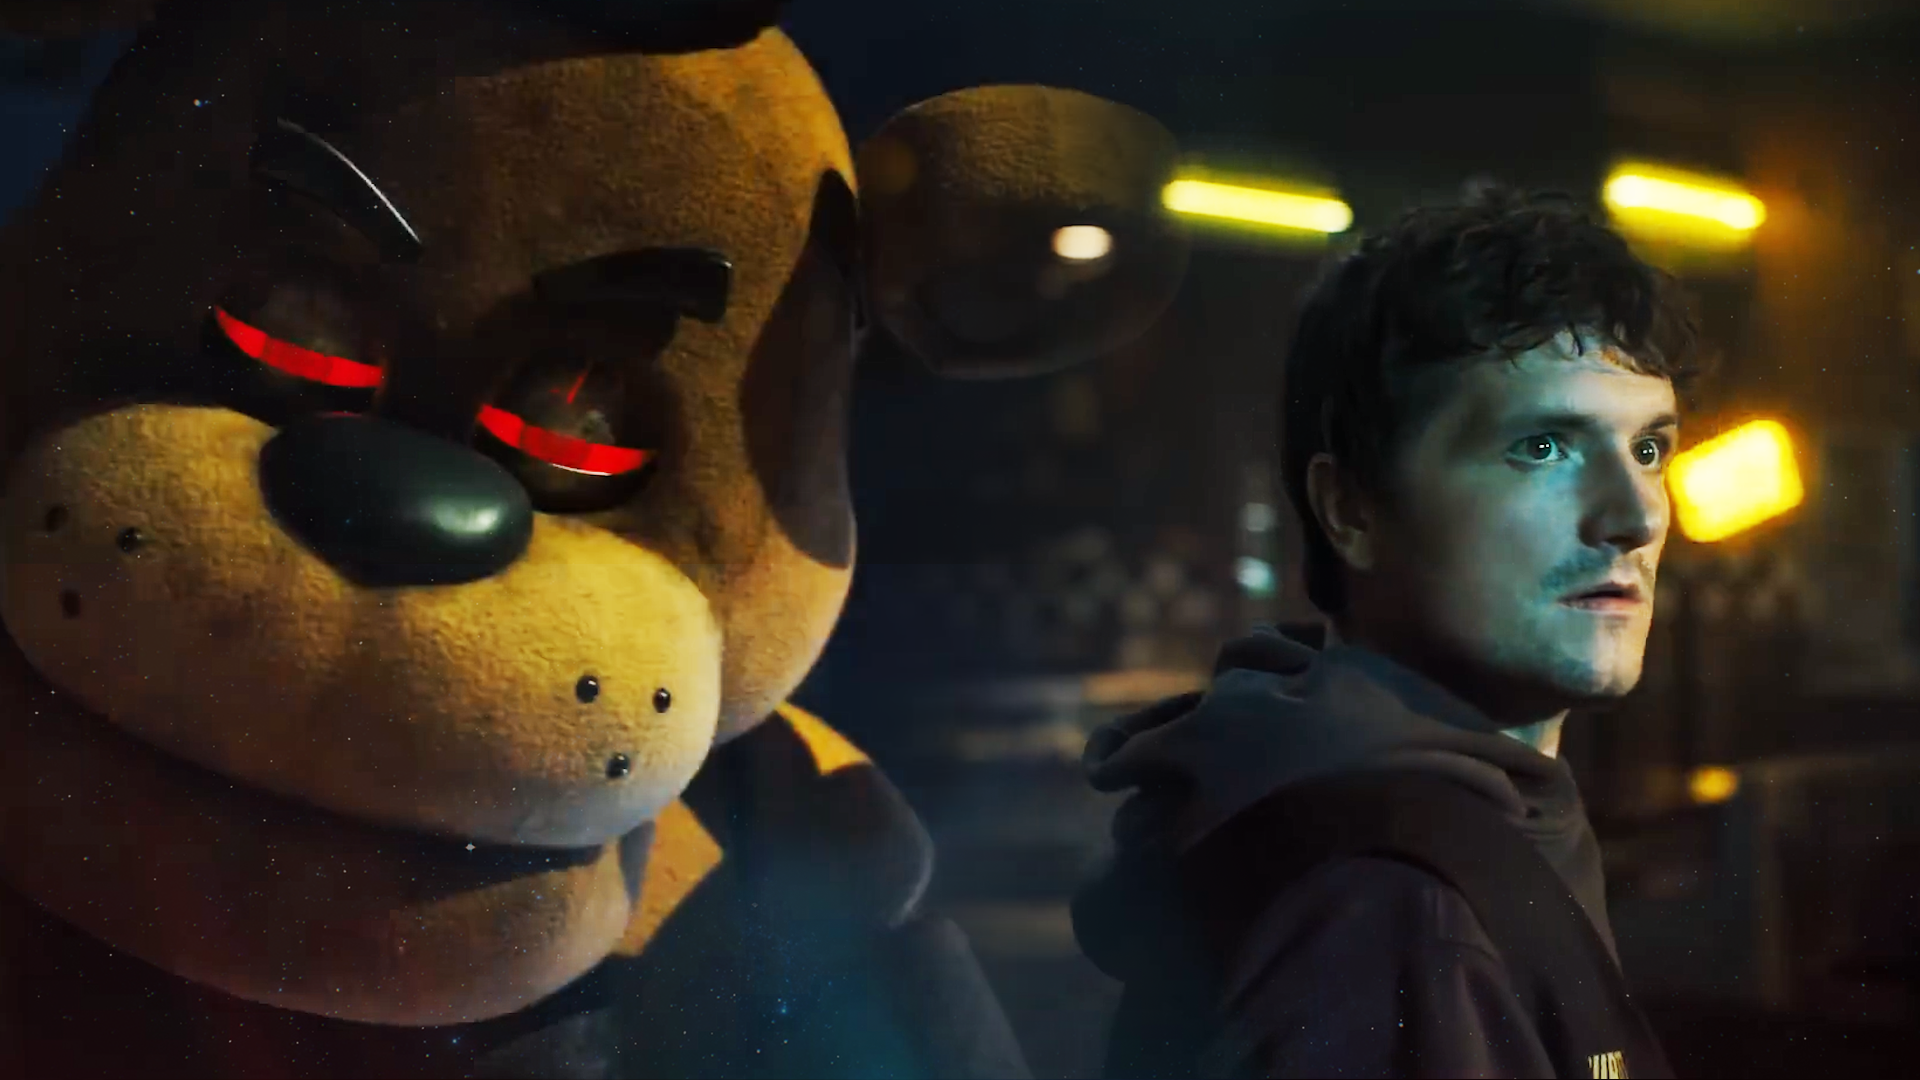 First Look at Five Nights at Freddy's Movie Animatronics